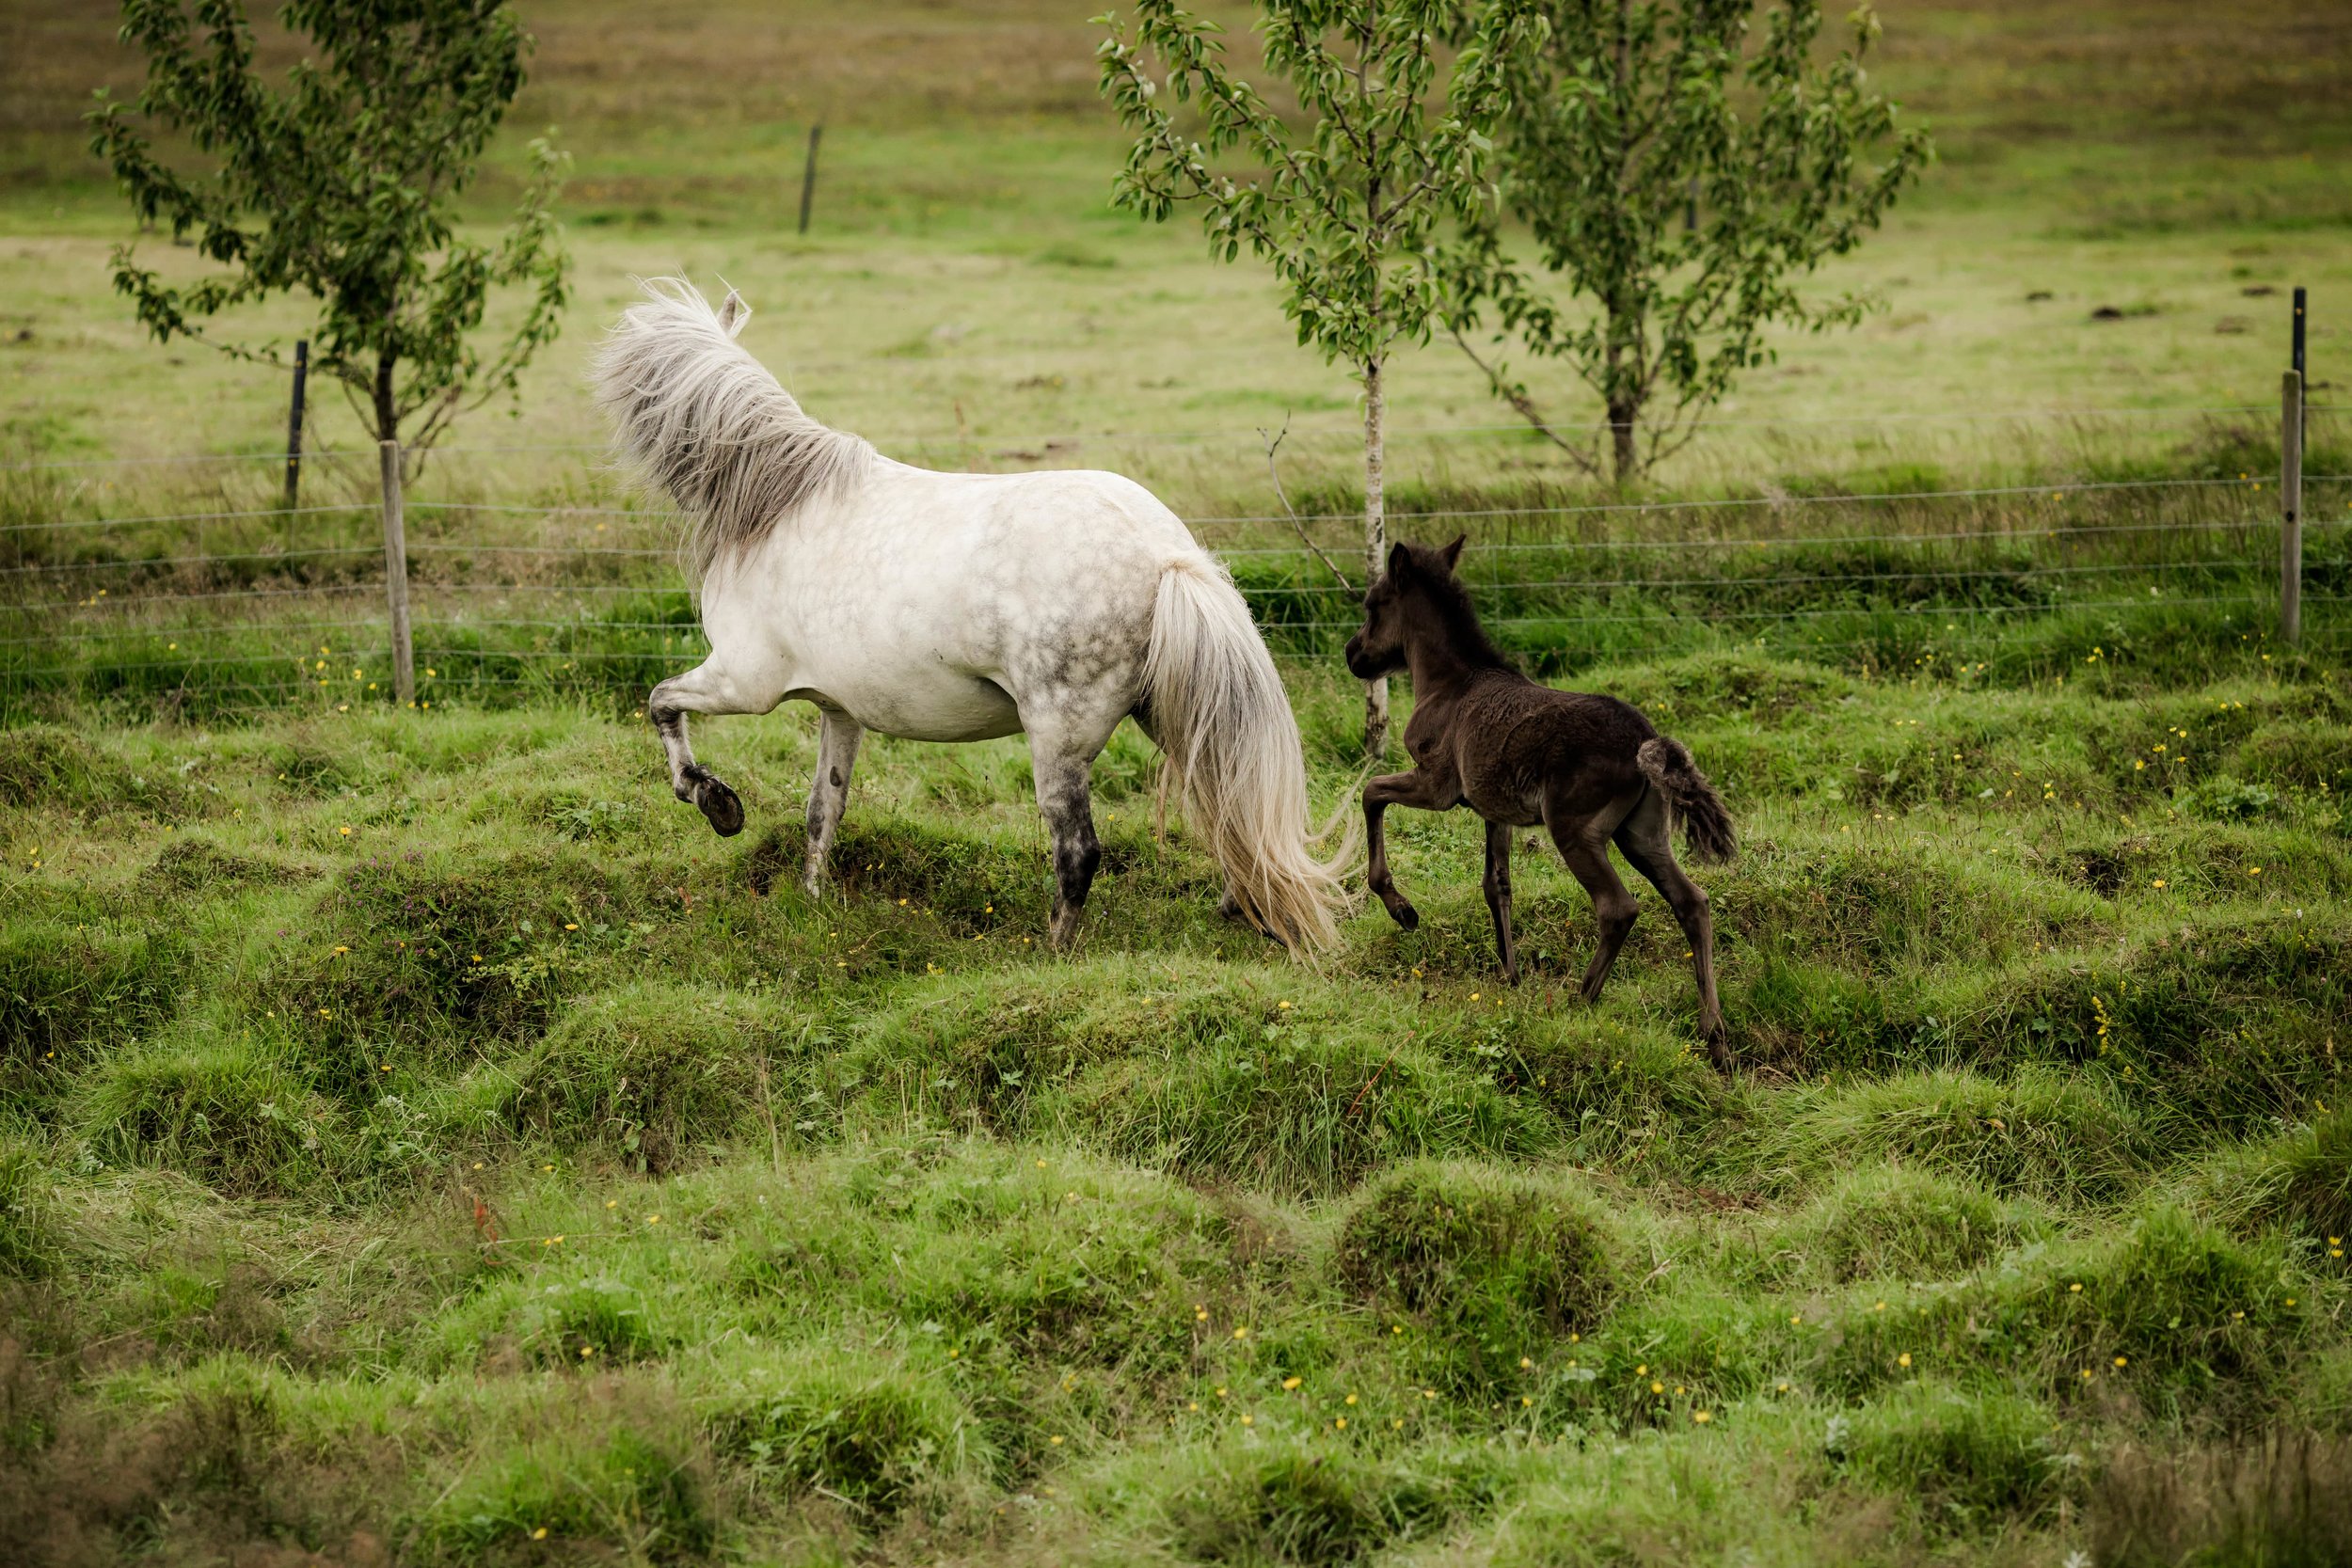 Horses in Iceland by Christina Swanson now on Cottage Hill29.jpg